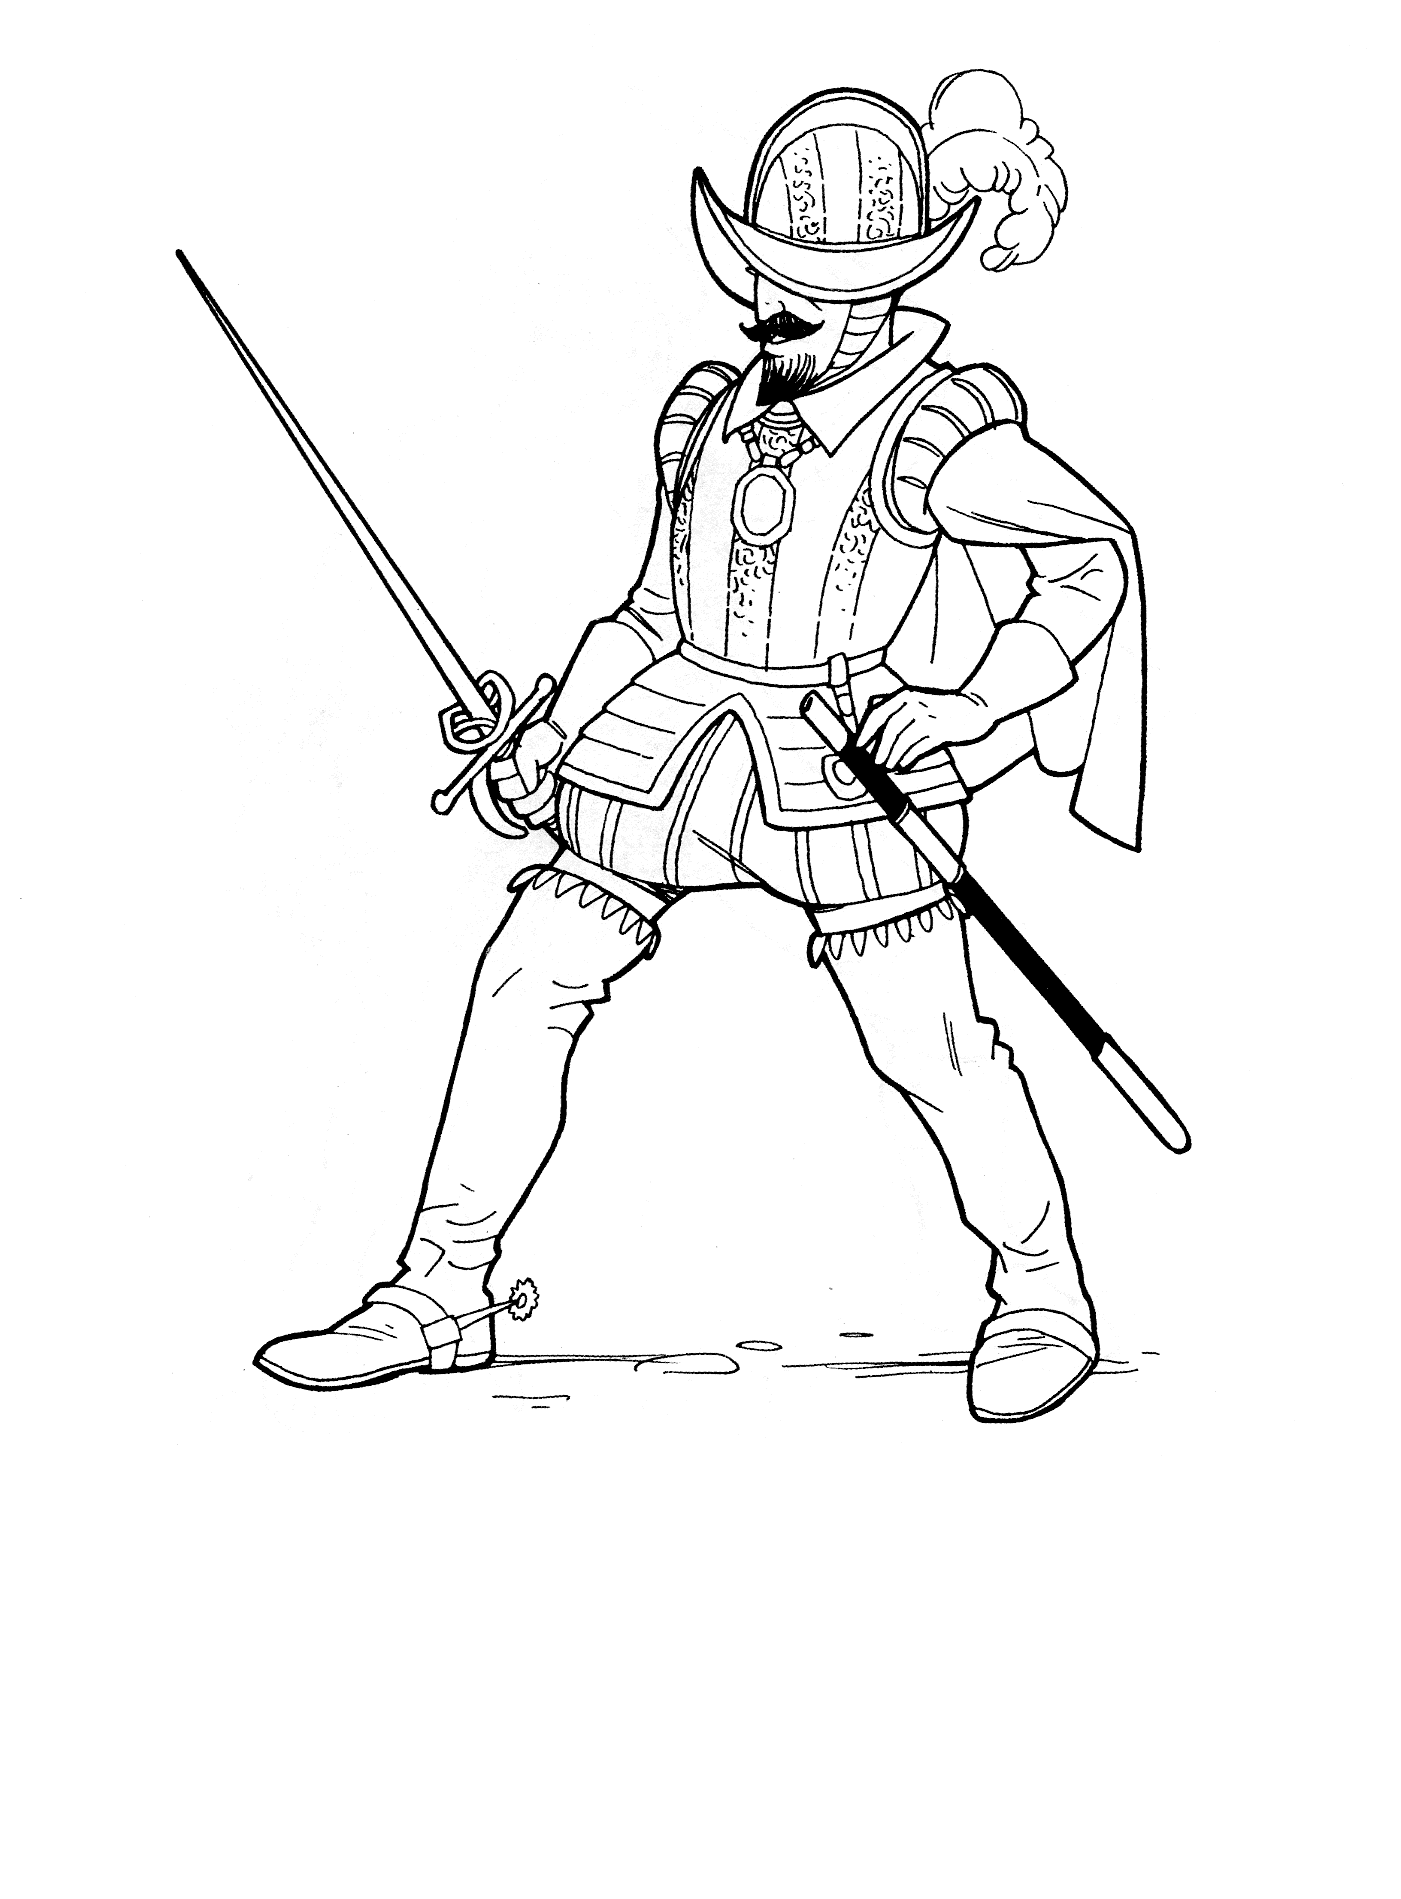 Soldiers and knights coloring pages 5 / Soldiers and Knights ...